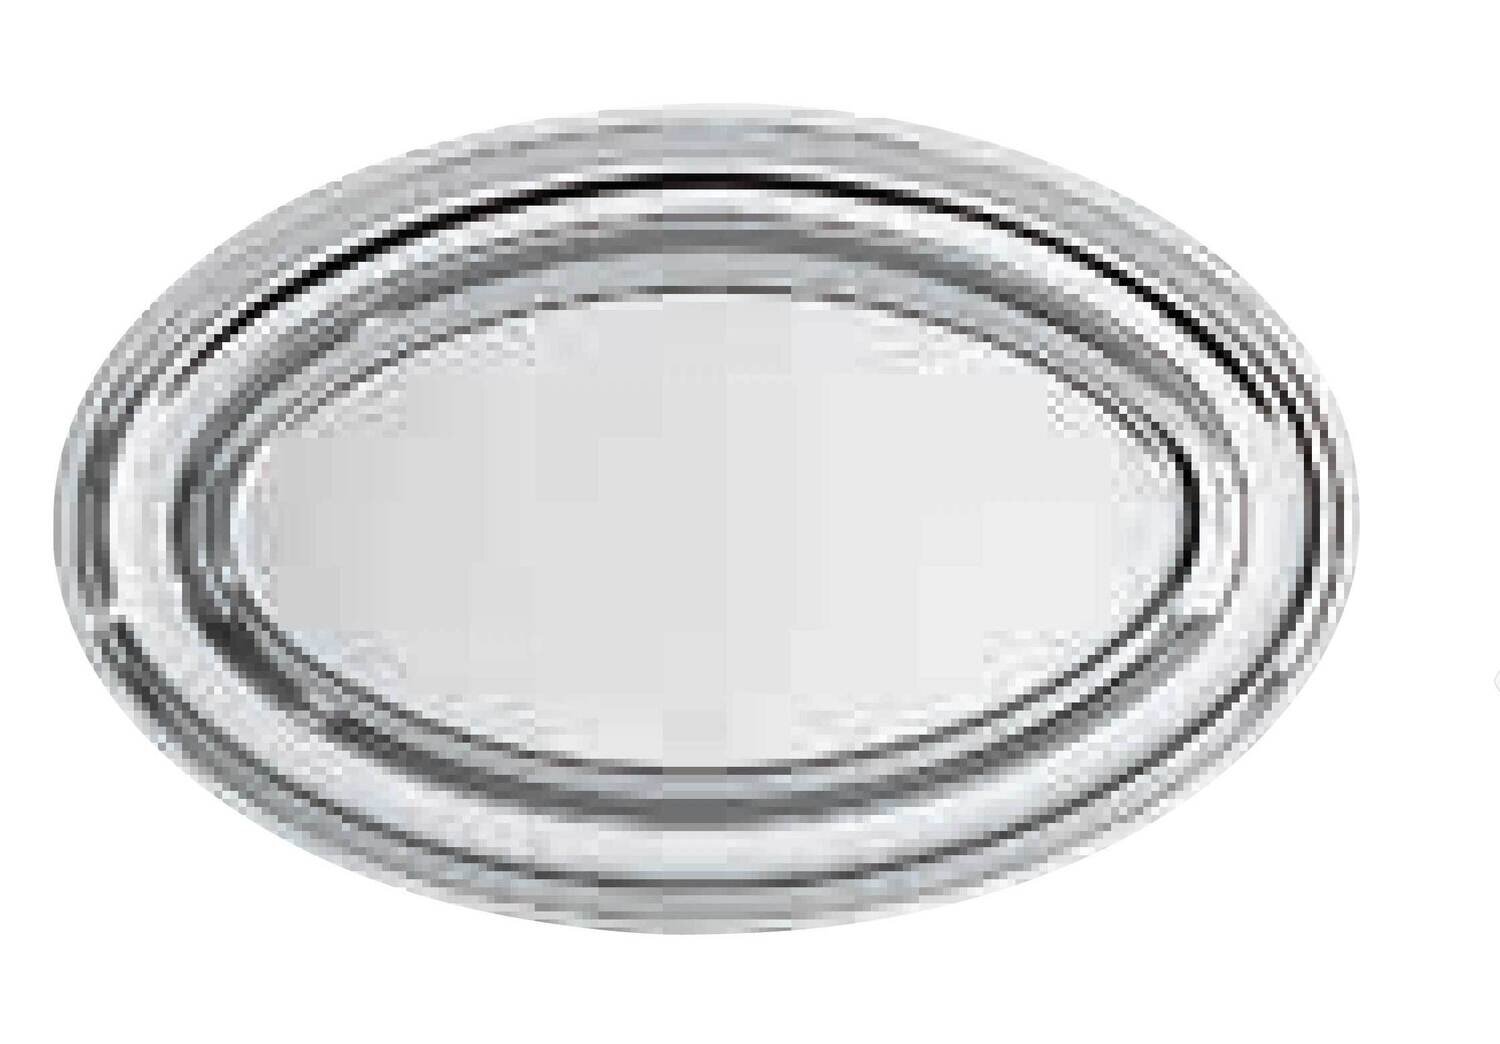 Ercuis Classique Oval Dish 11.75 x 7.5 Inch Silver Plated F530471-30